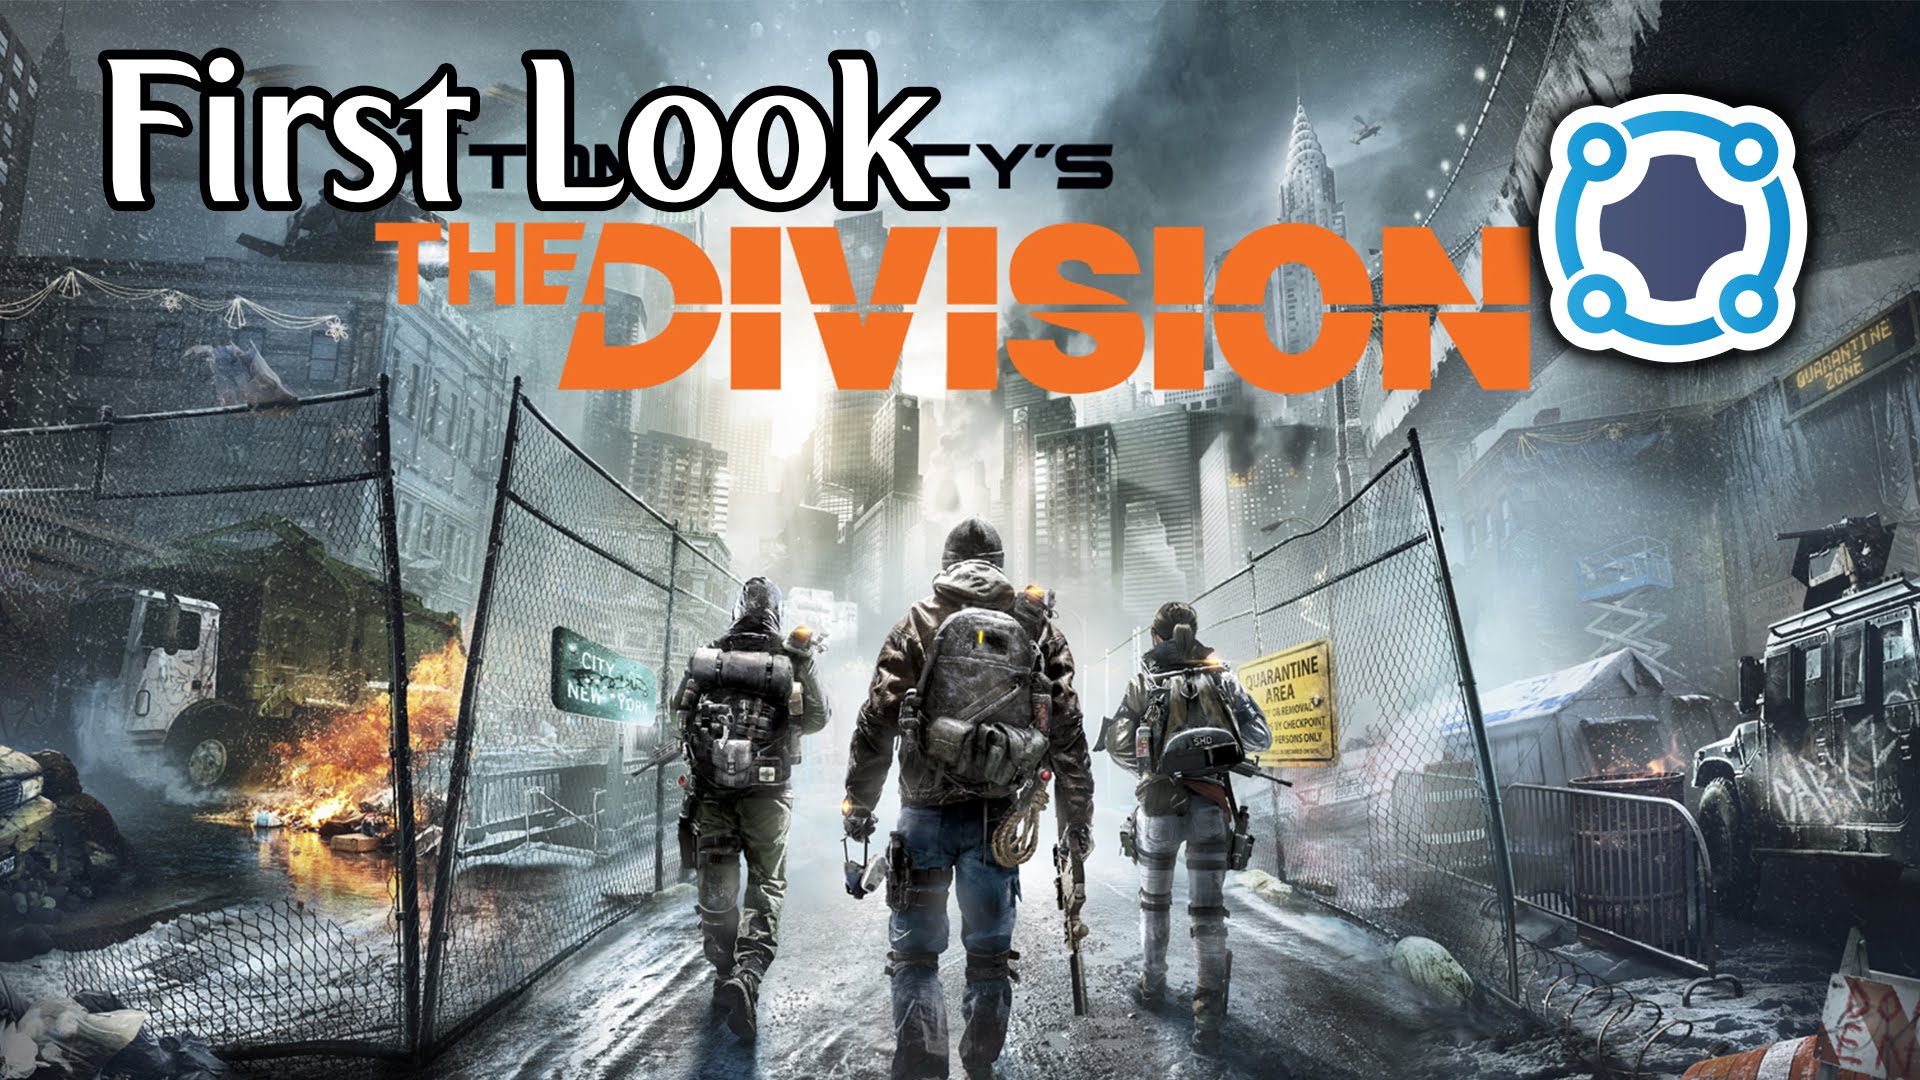 First Look - Tom Clancy's The Division (Beta)